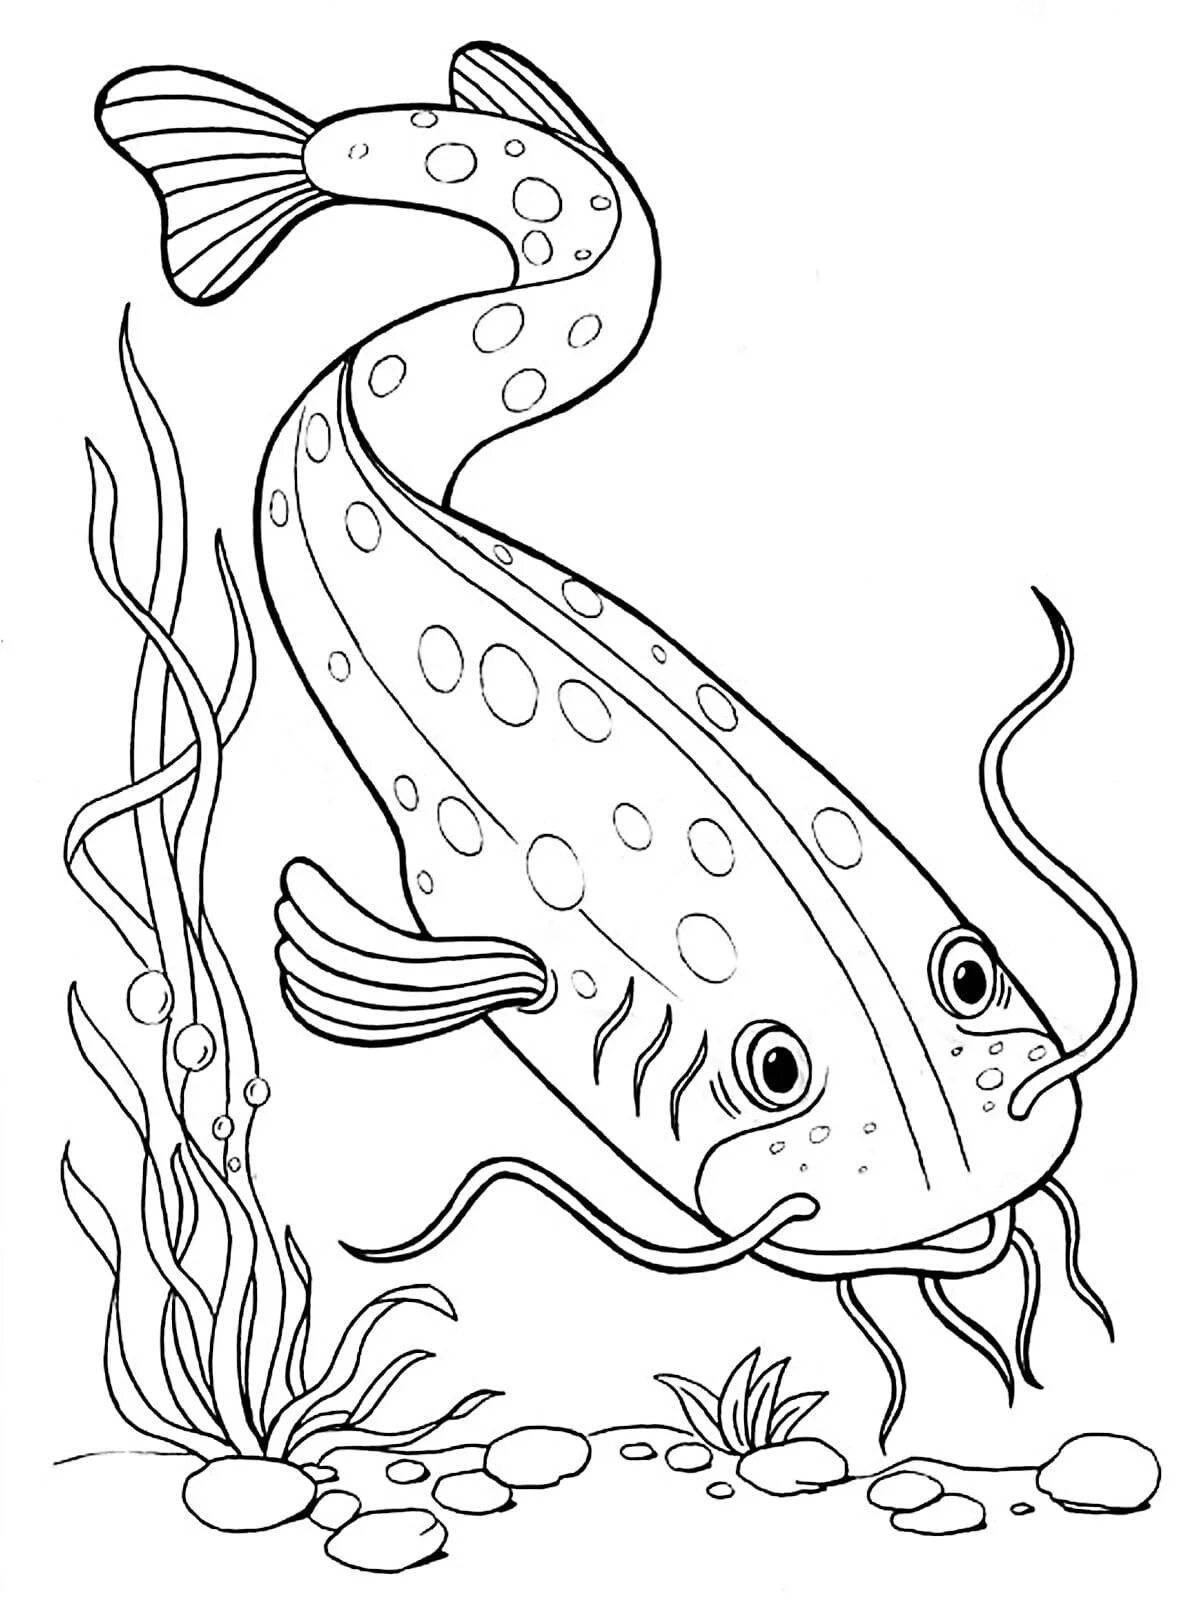 Animated catfish coloring page